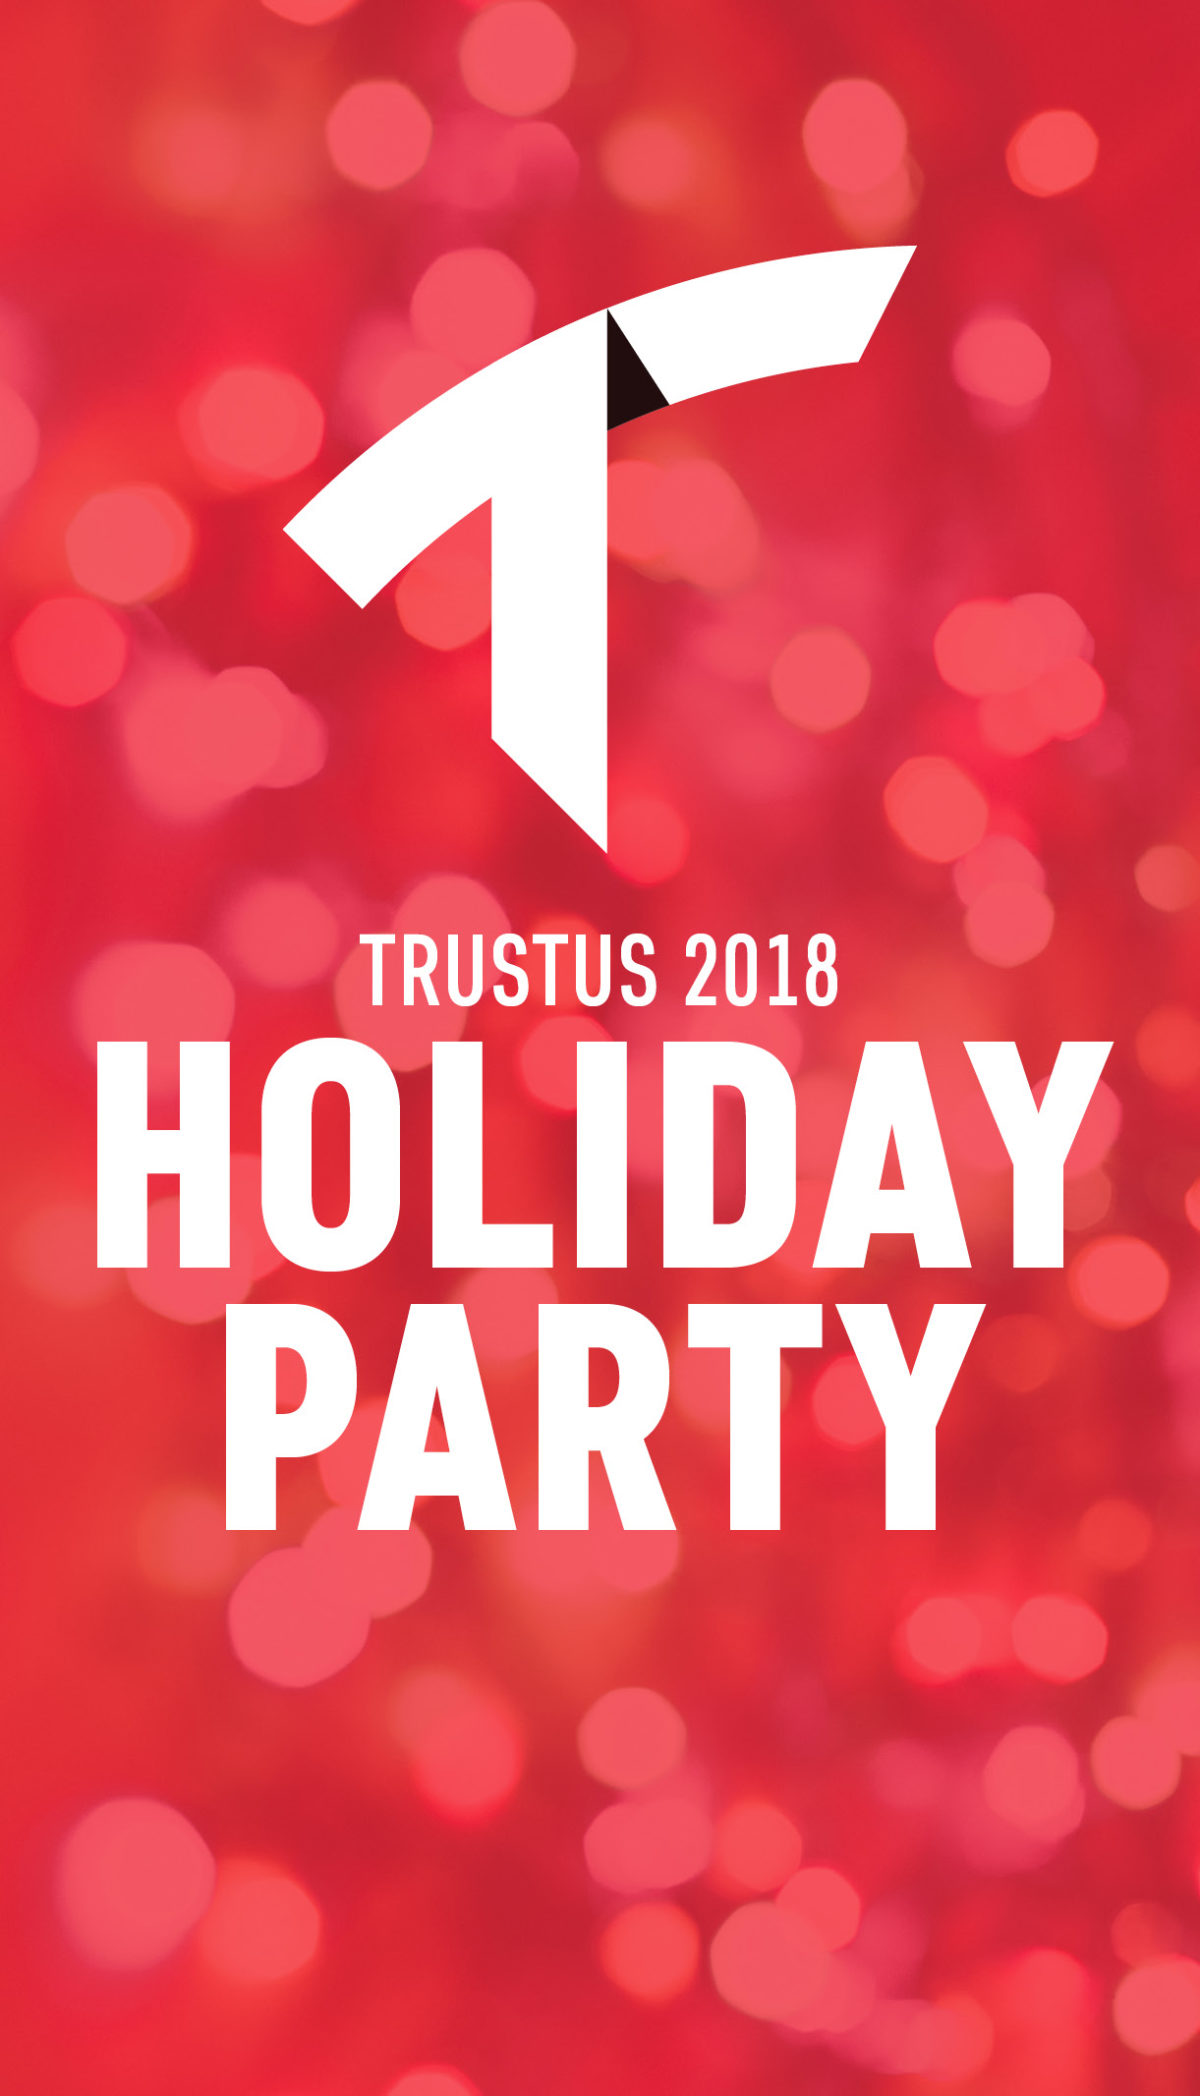 Trustus 2018 Holiday Party